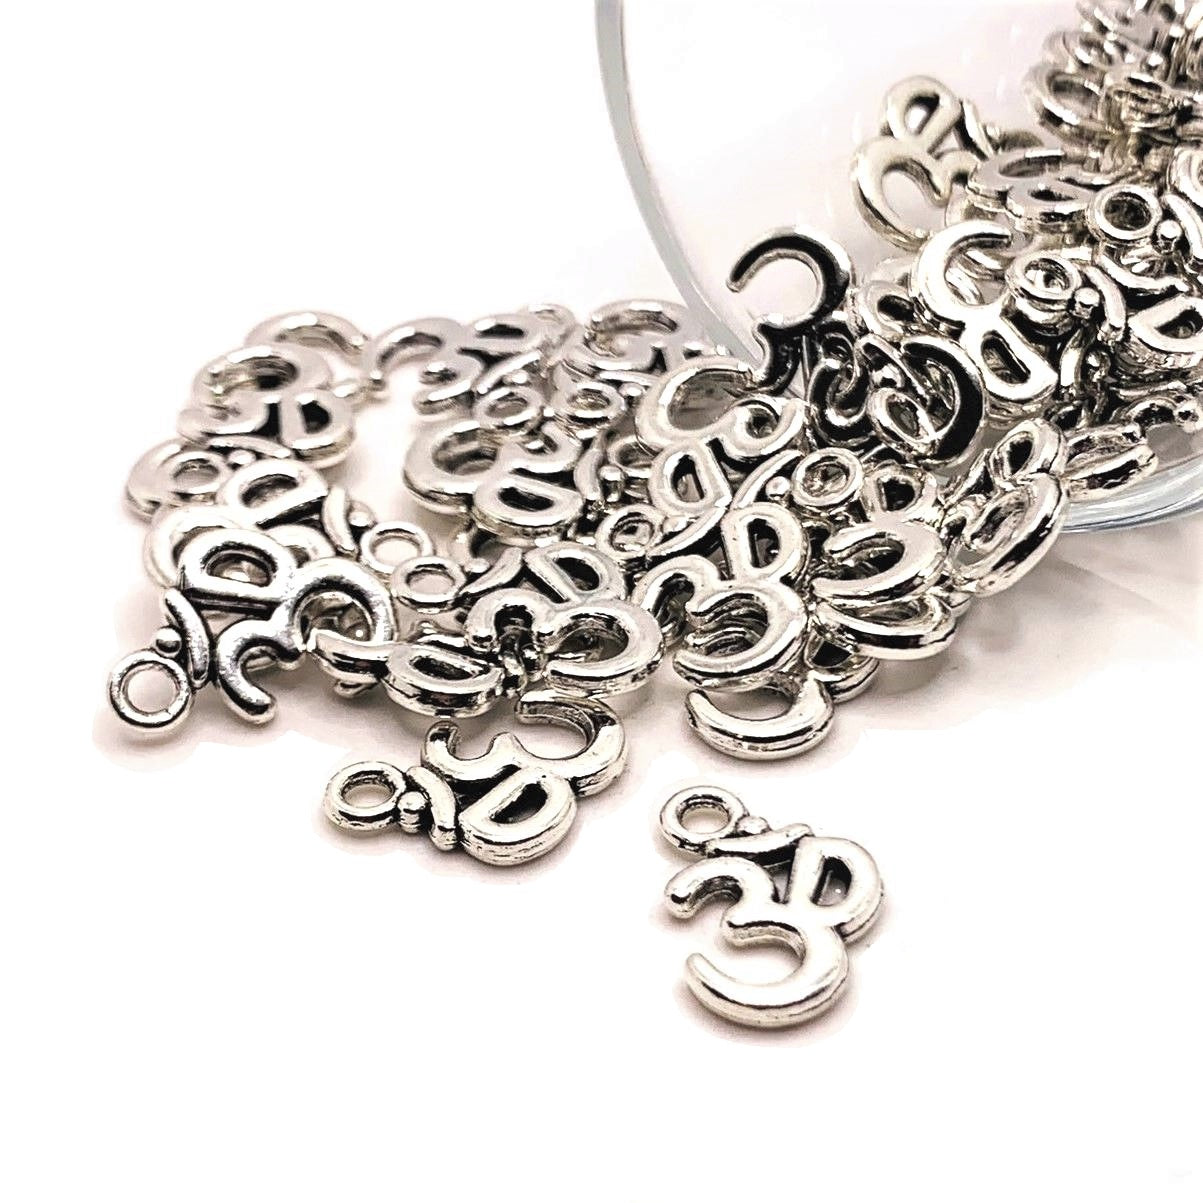 4, 20 or 50 Pieces: Silver Om/Ohm Symbol Charms